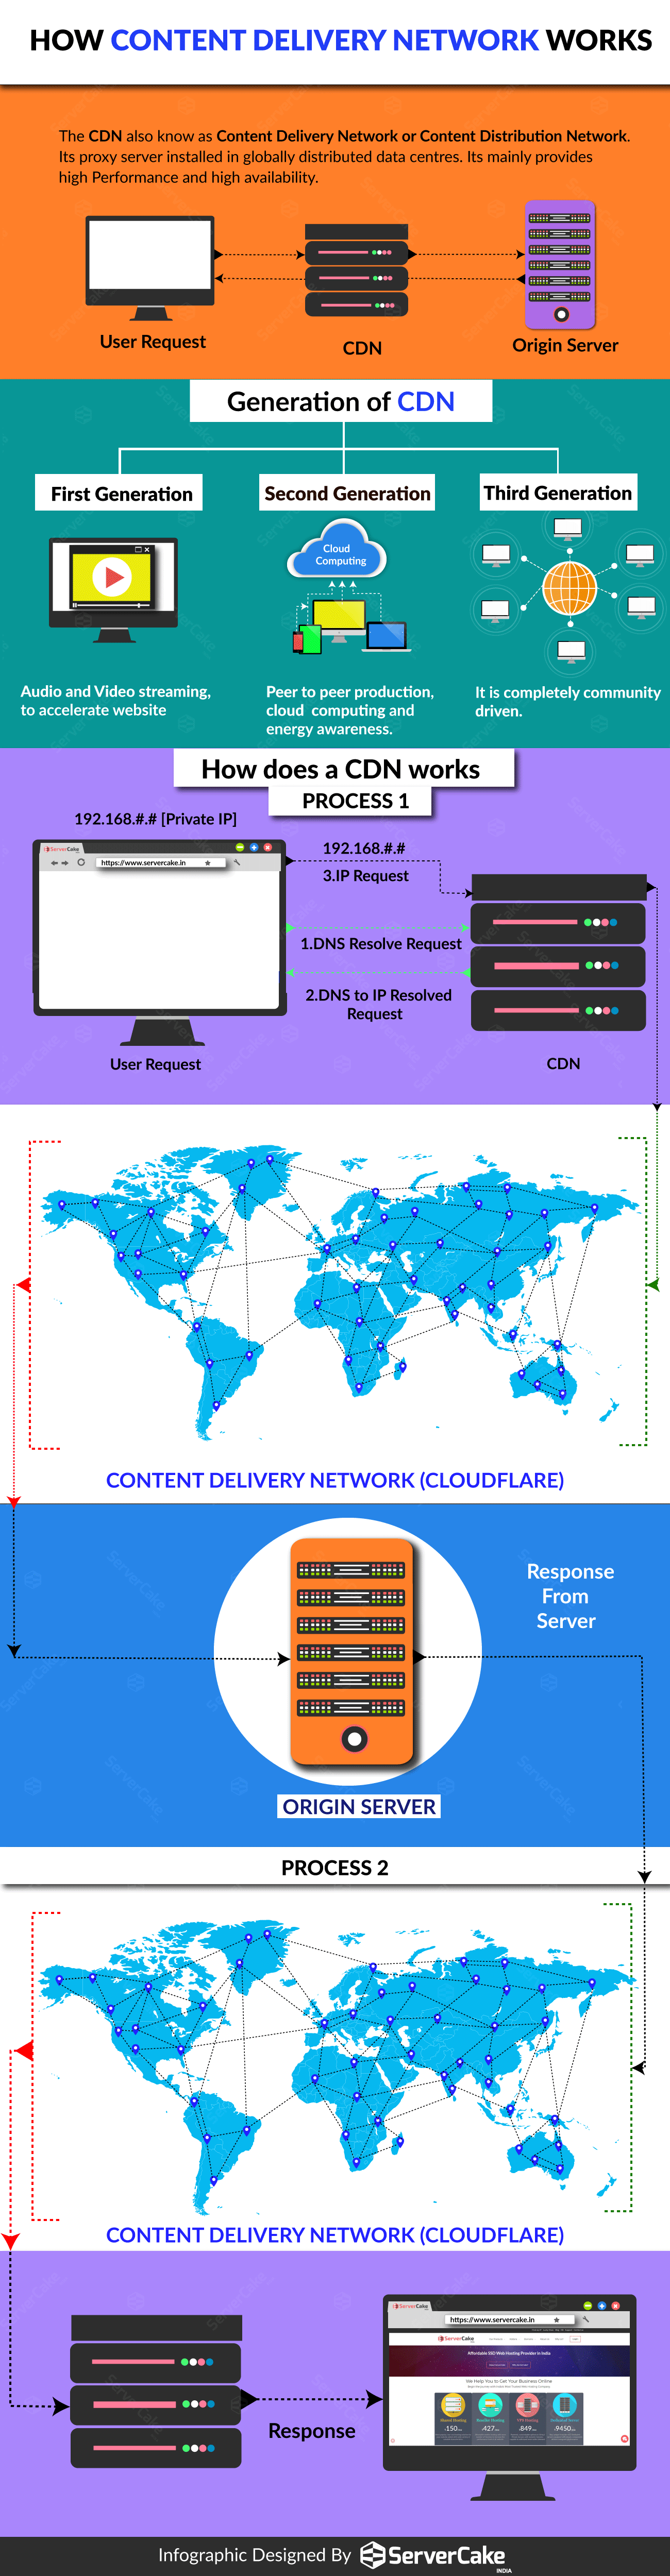 Content Delivery Networks (CDN)